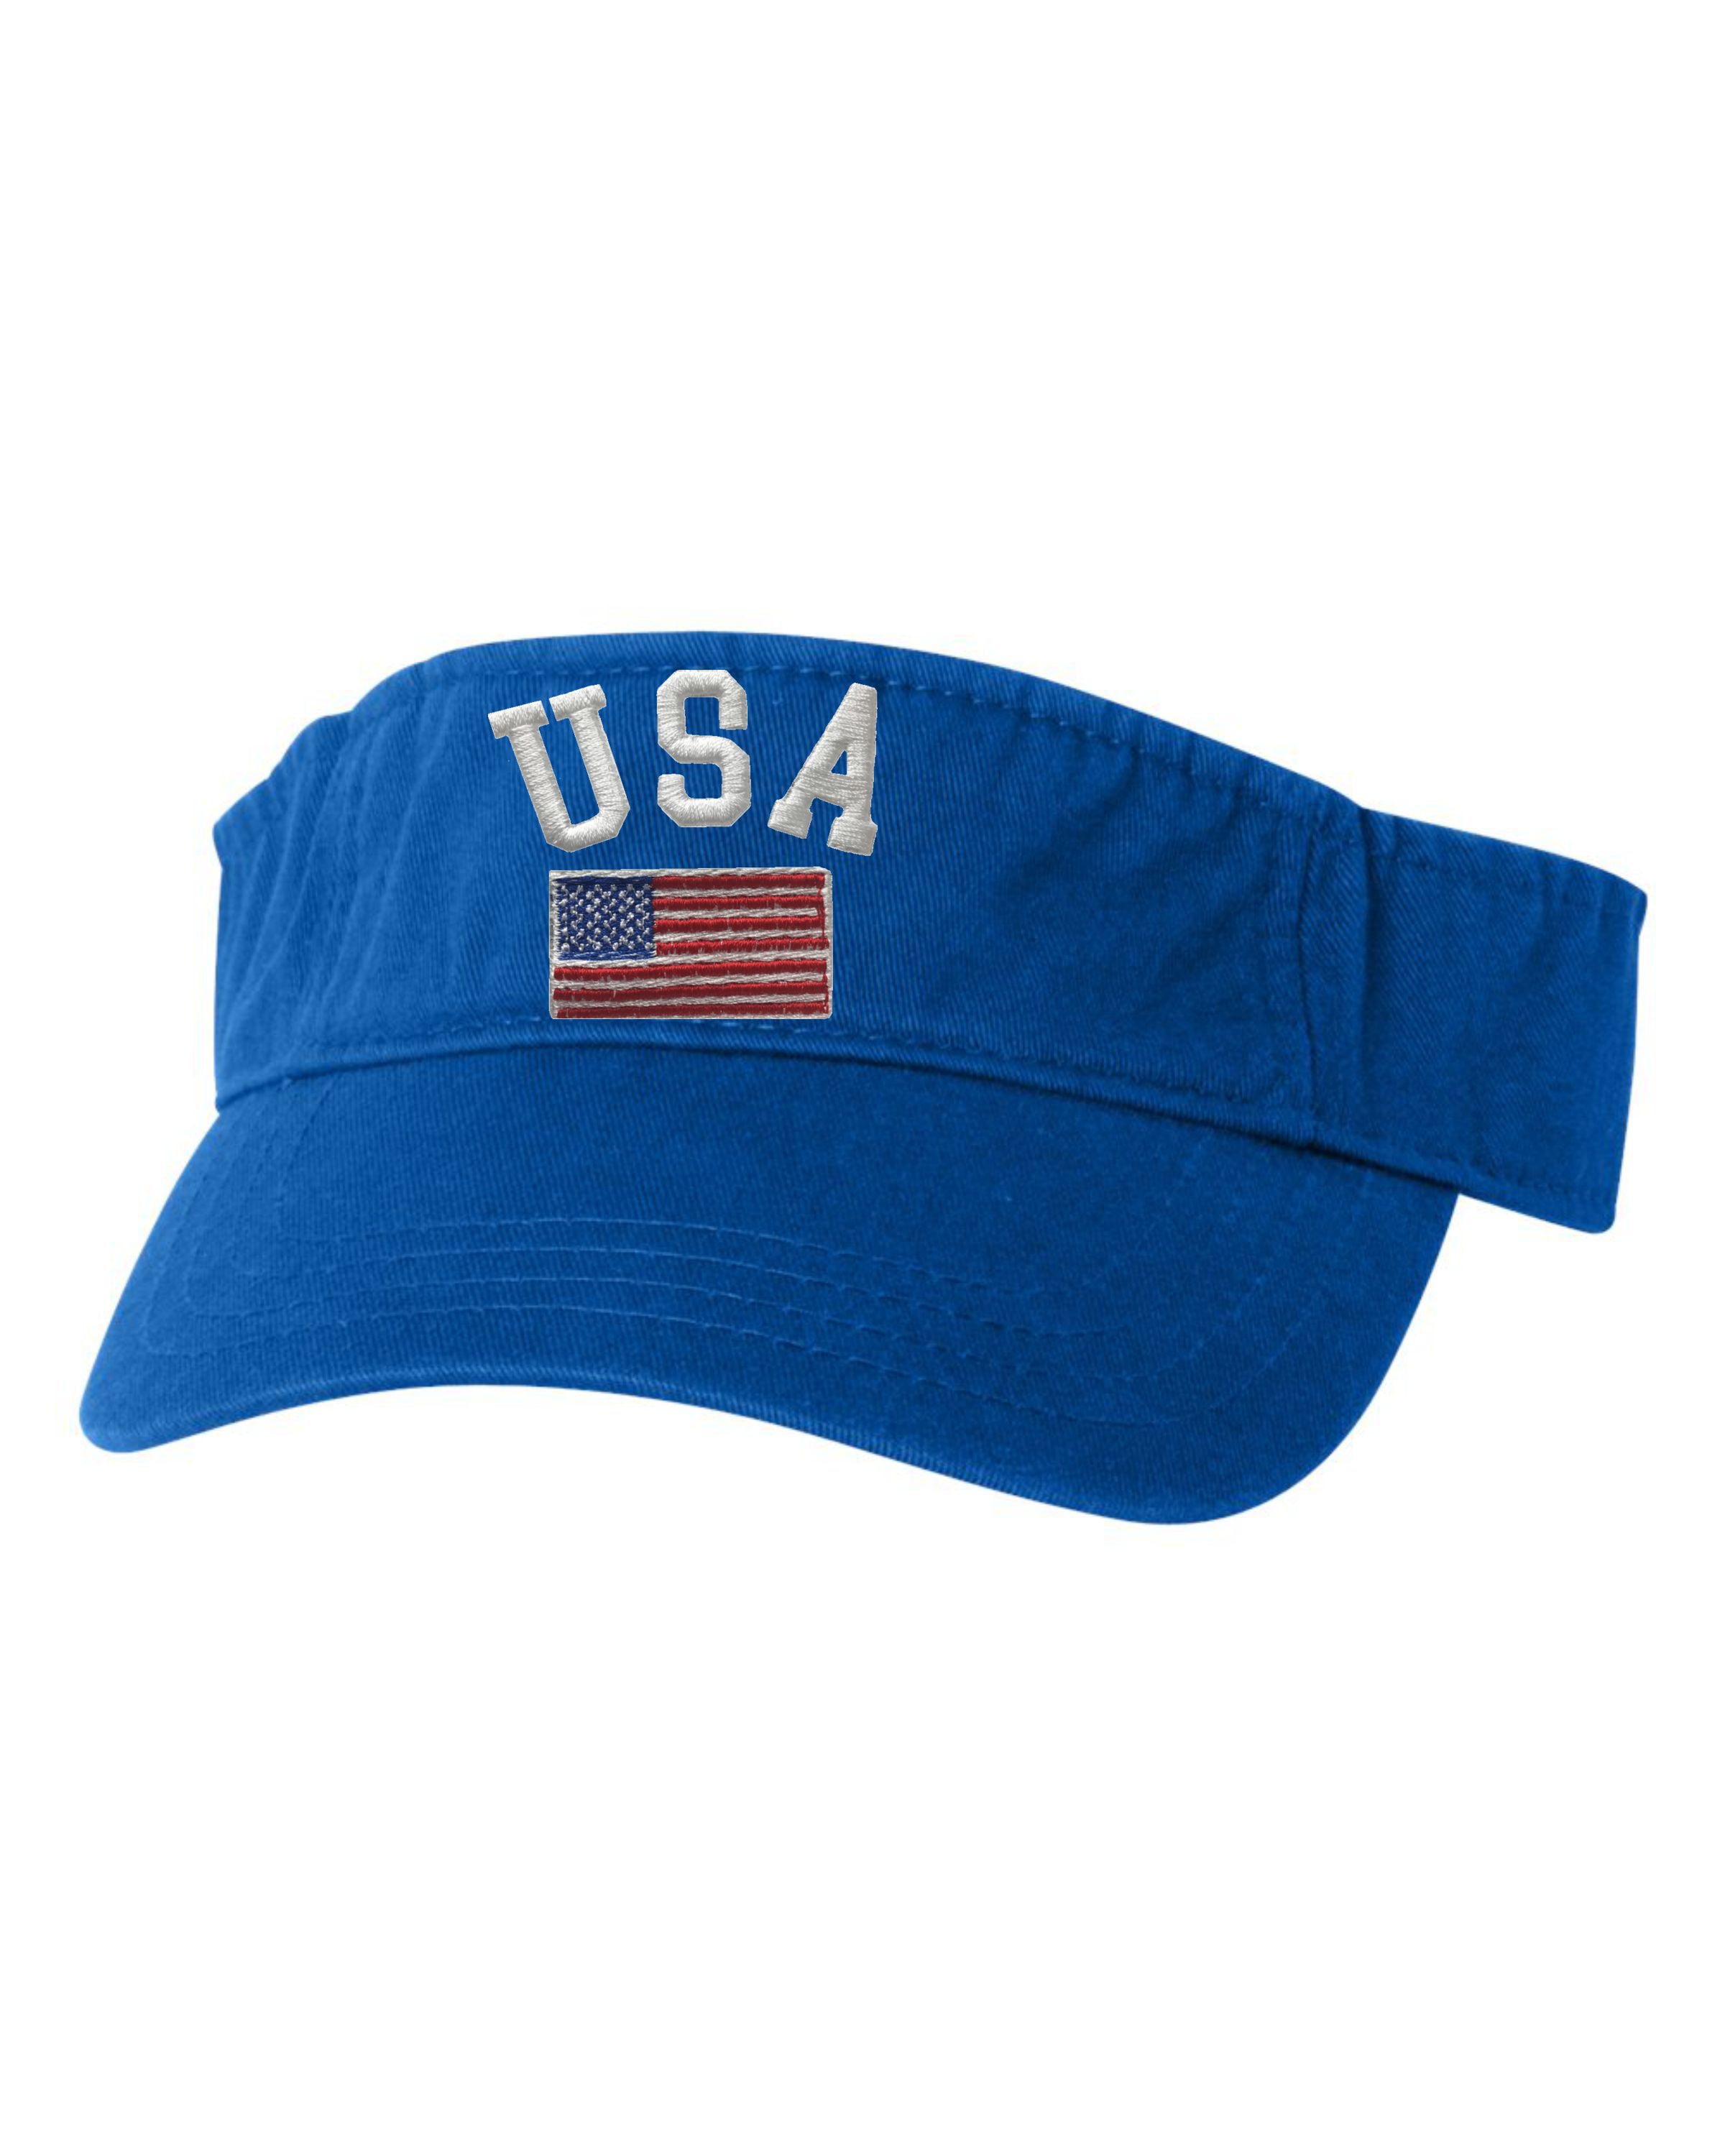 Adult USA National Pride Embroidered Knit Beanie Cap 